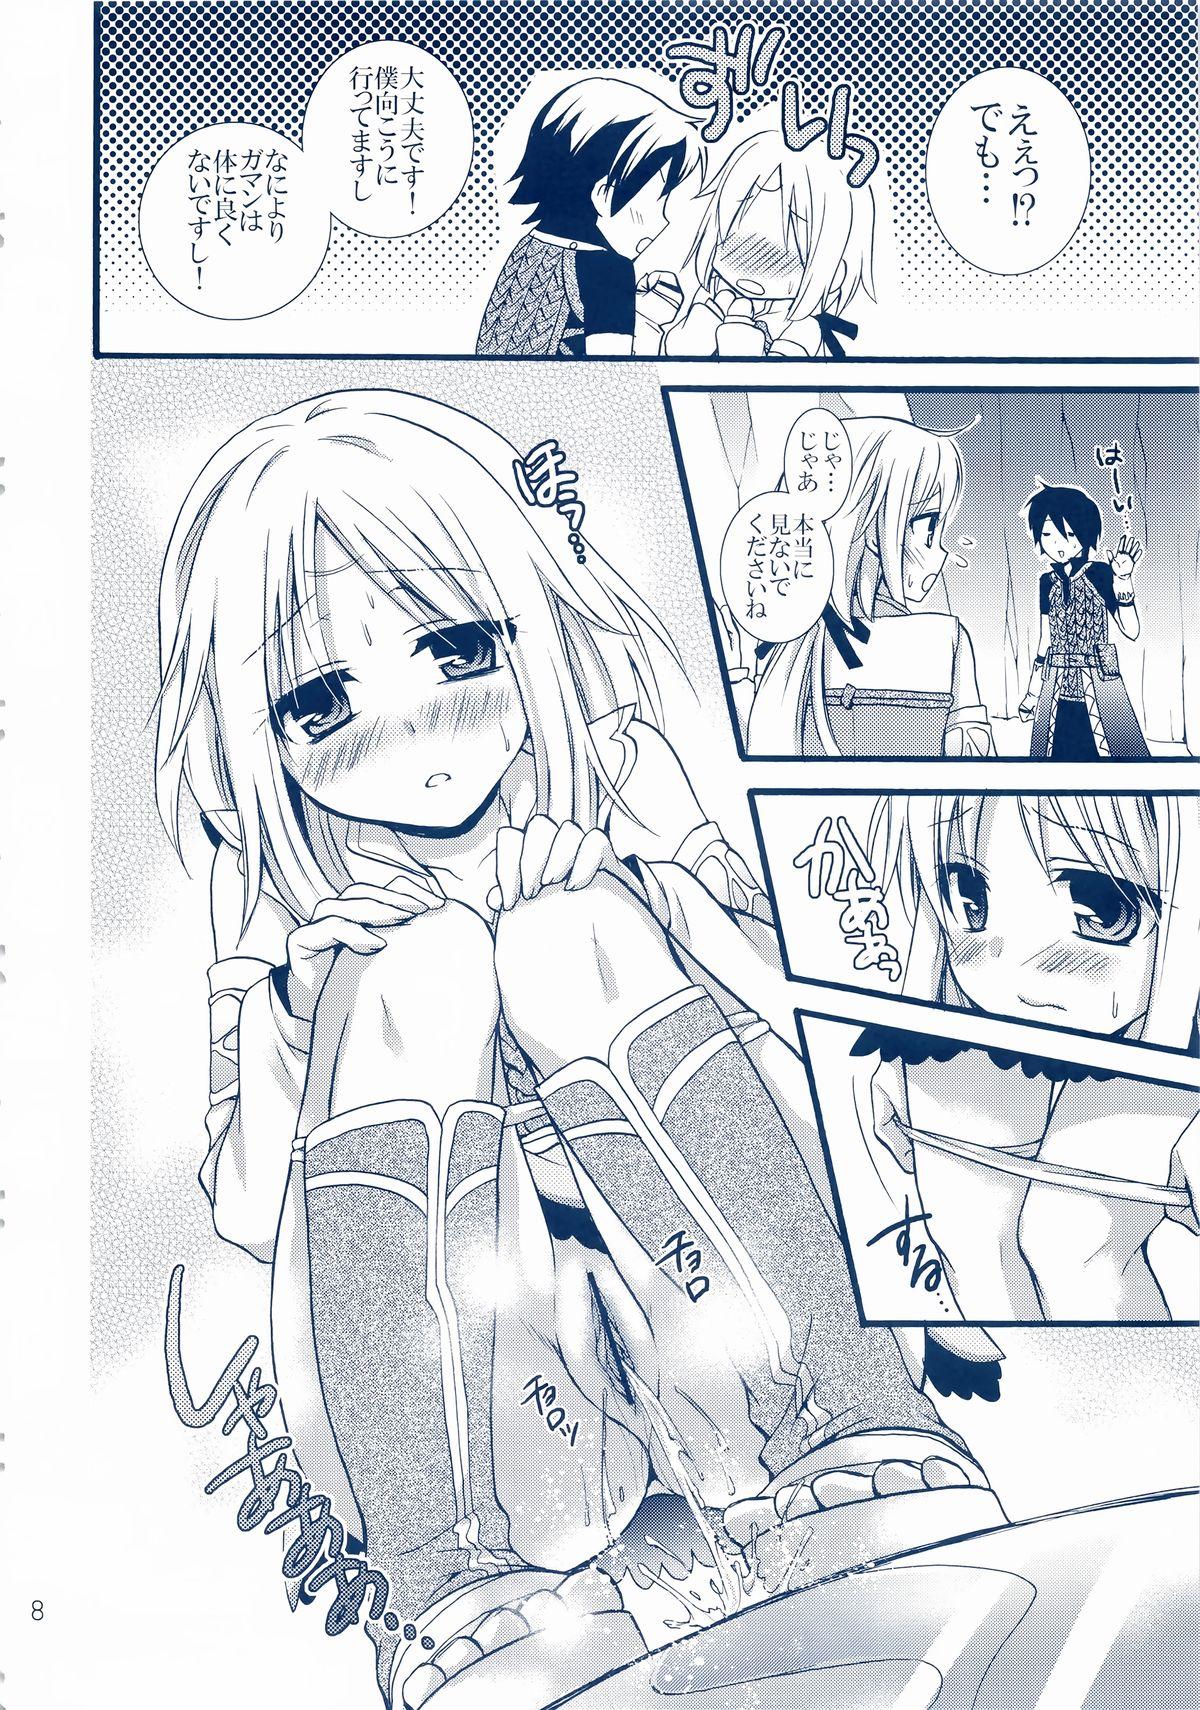 Chibola Mezase Dungeon Master - Rune factory Ass Licking - Page 8